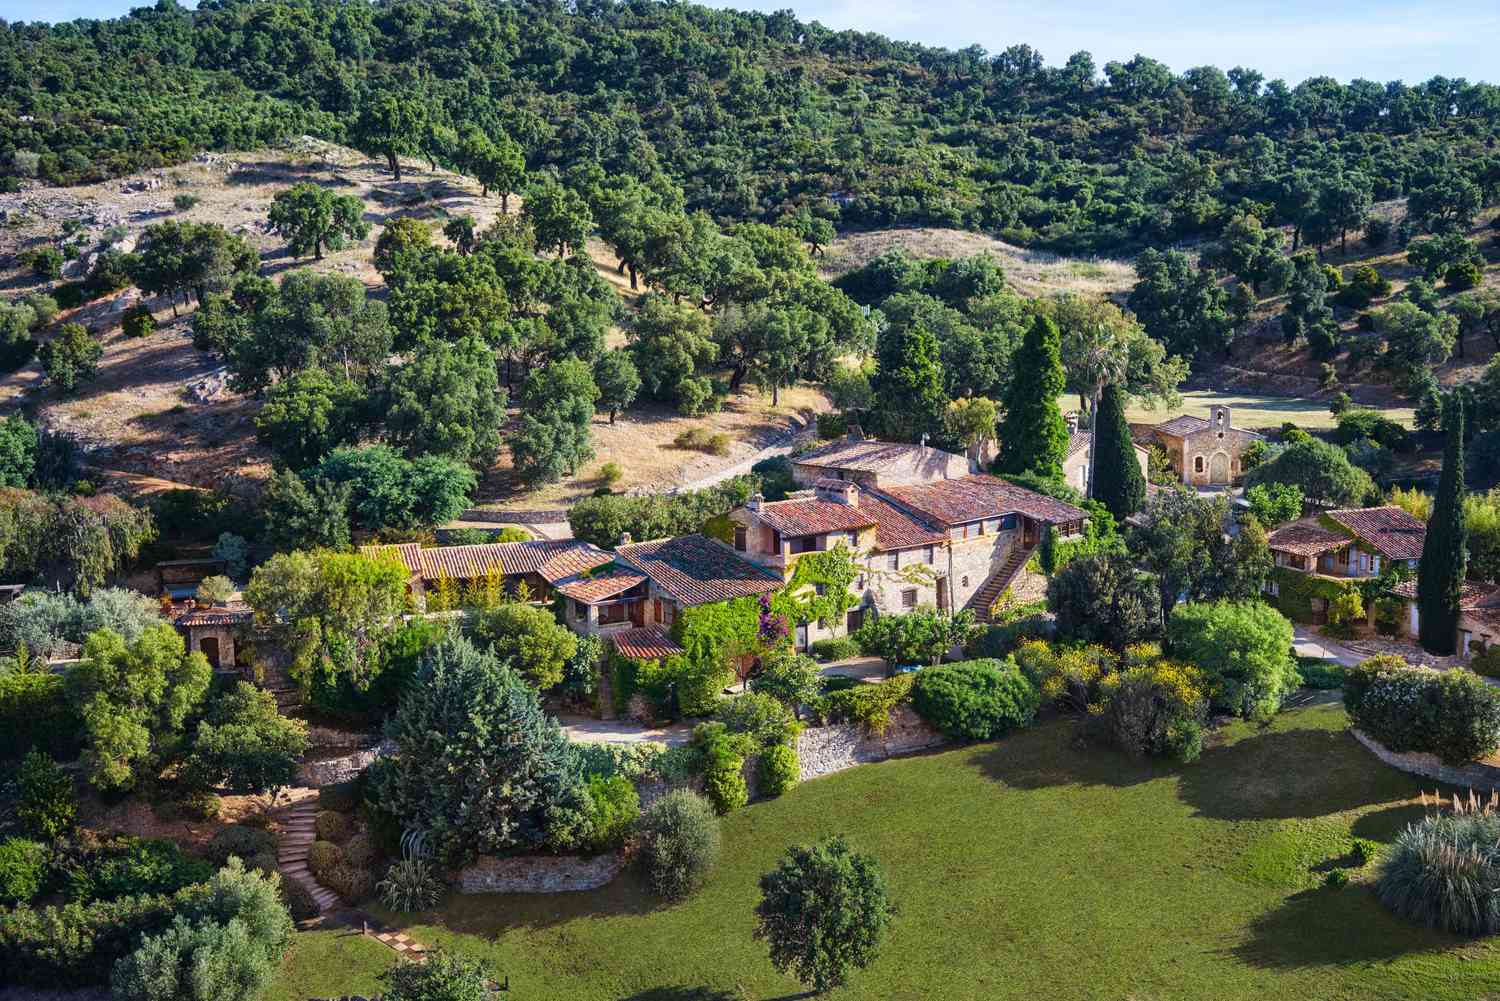 F:PHOTOMediaFactory ActionsRequests DropBox43898#sothebysSotheby's Int. Realty France Cote d'Azur - Johnny Depp estate arial village.jpg